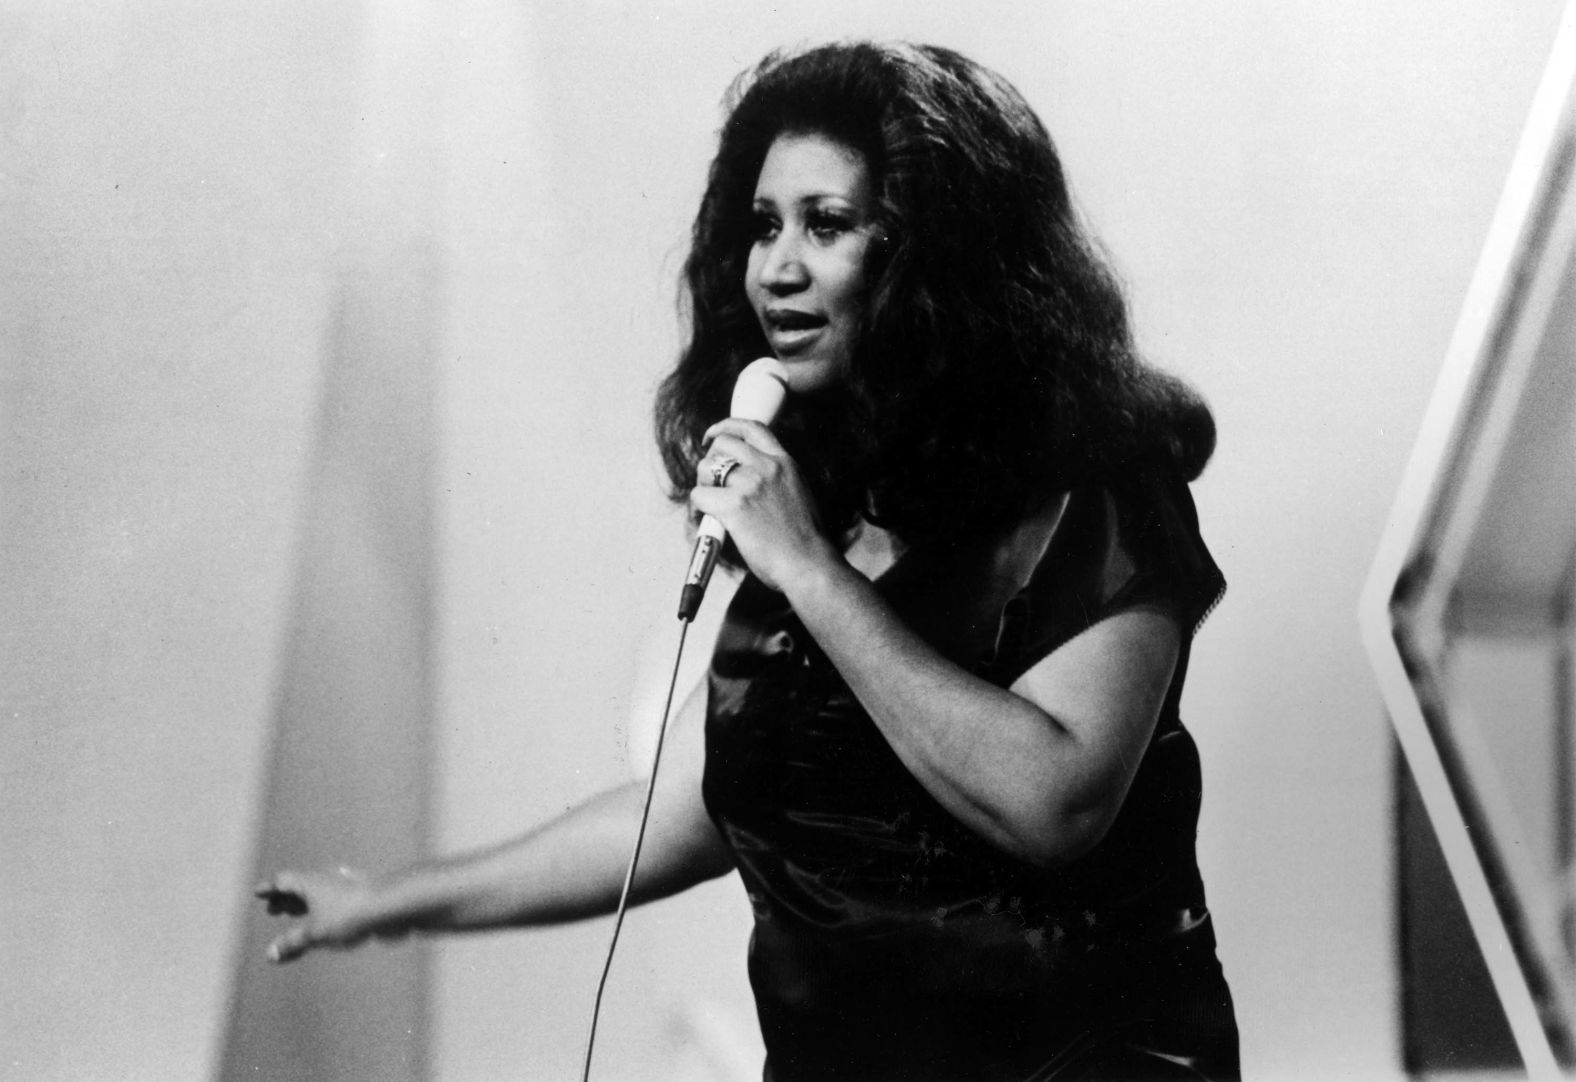 Franklin on stage in 1980.